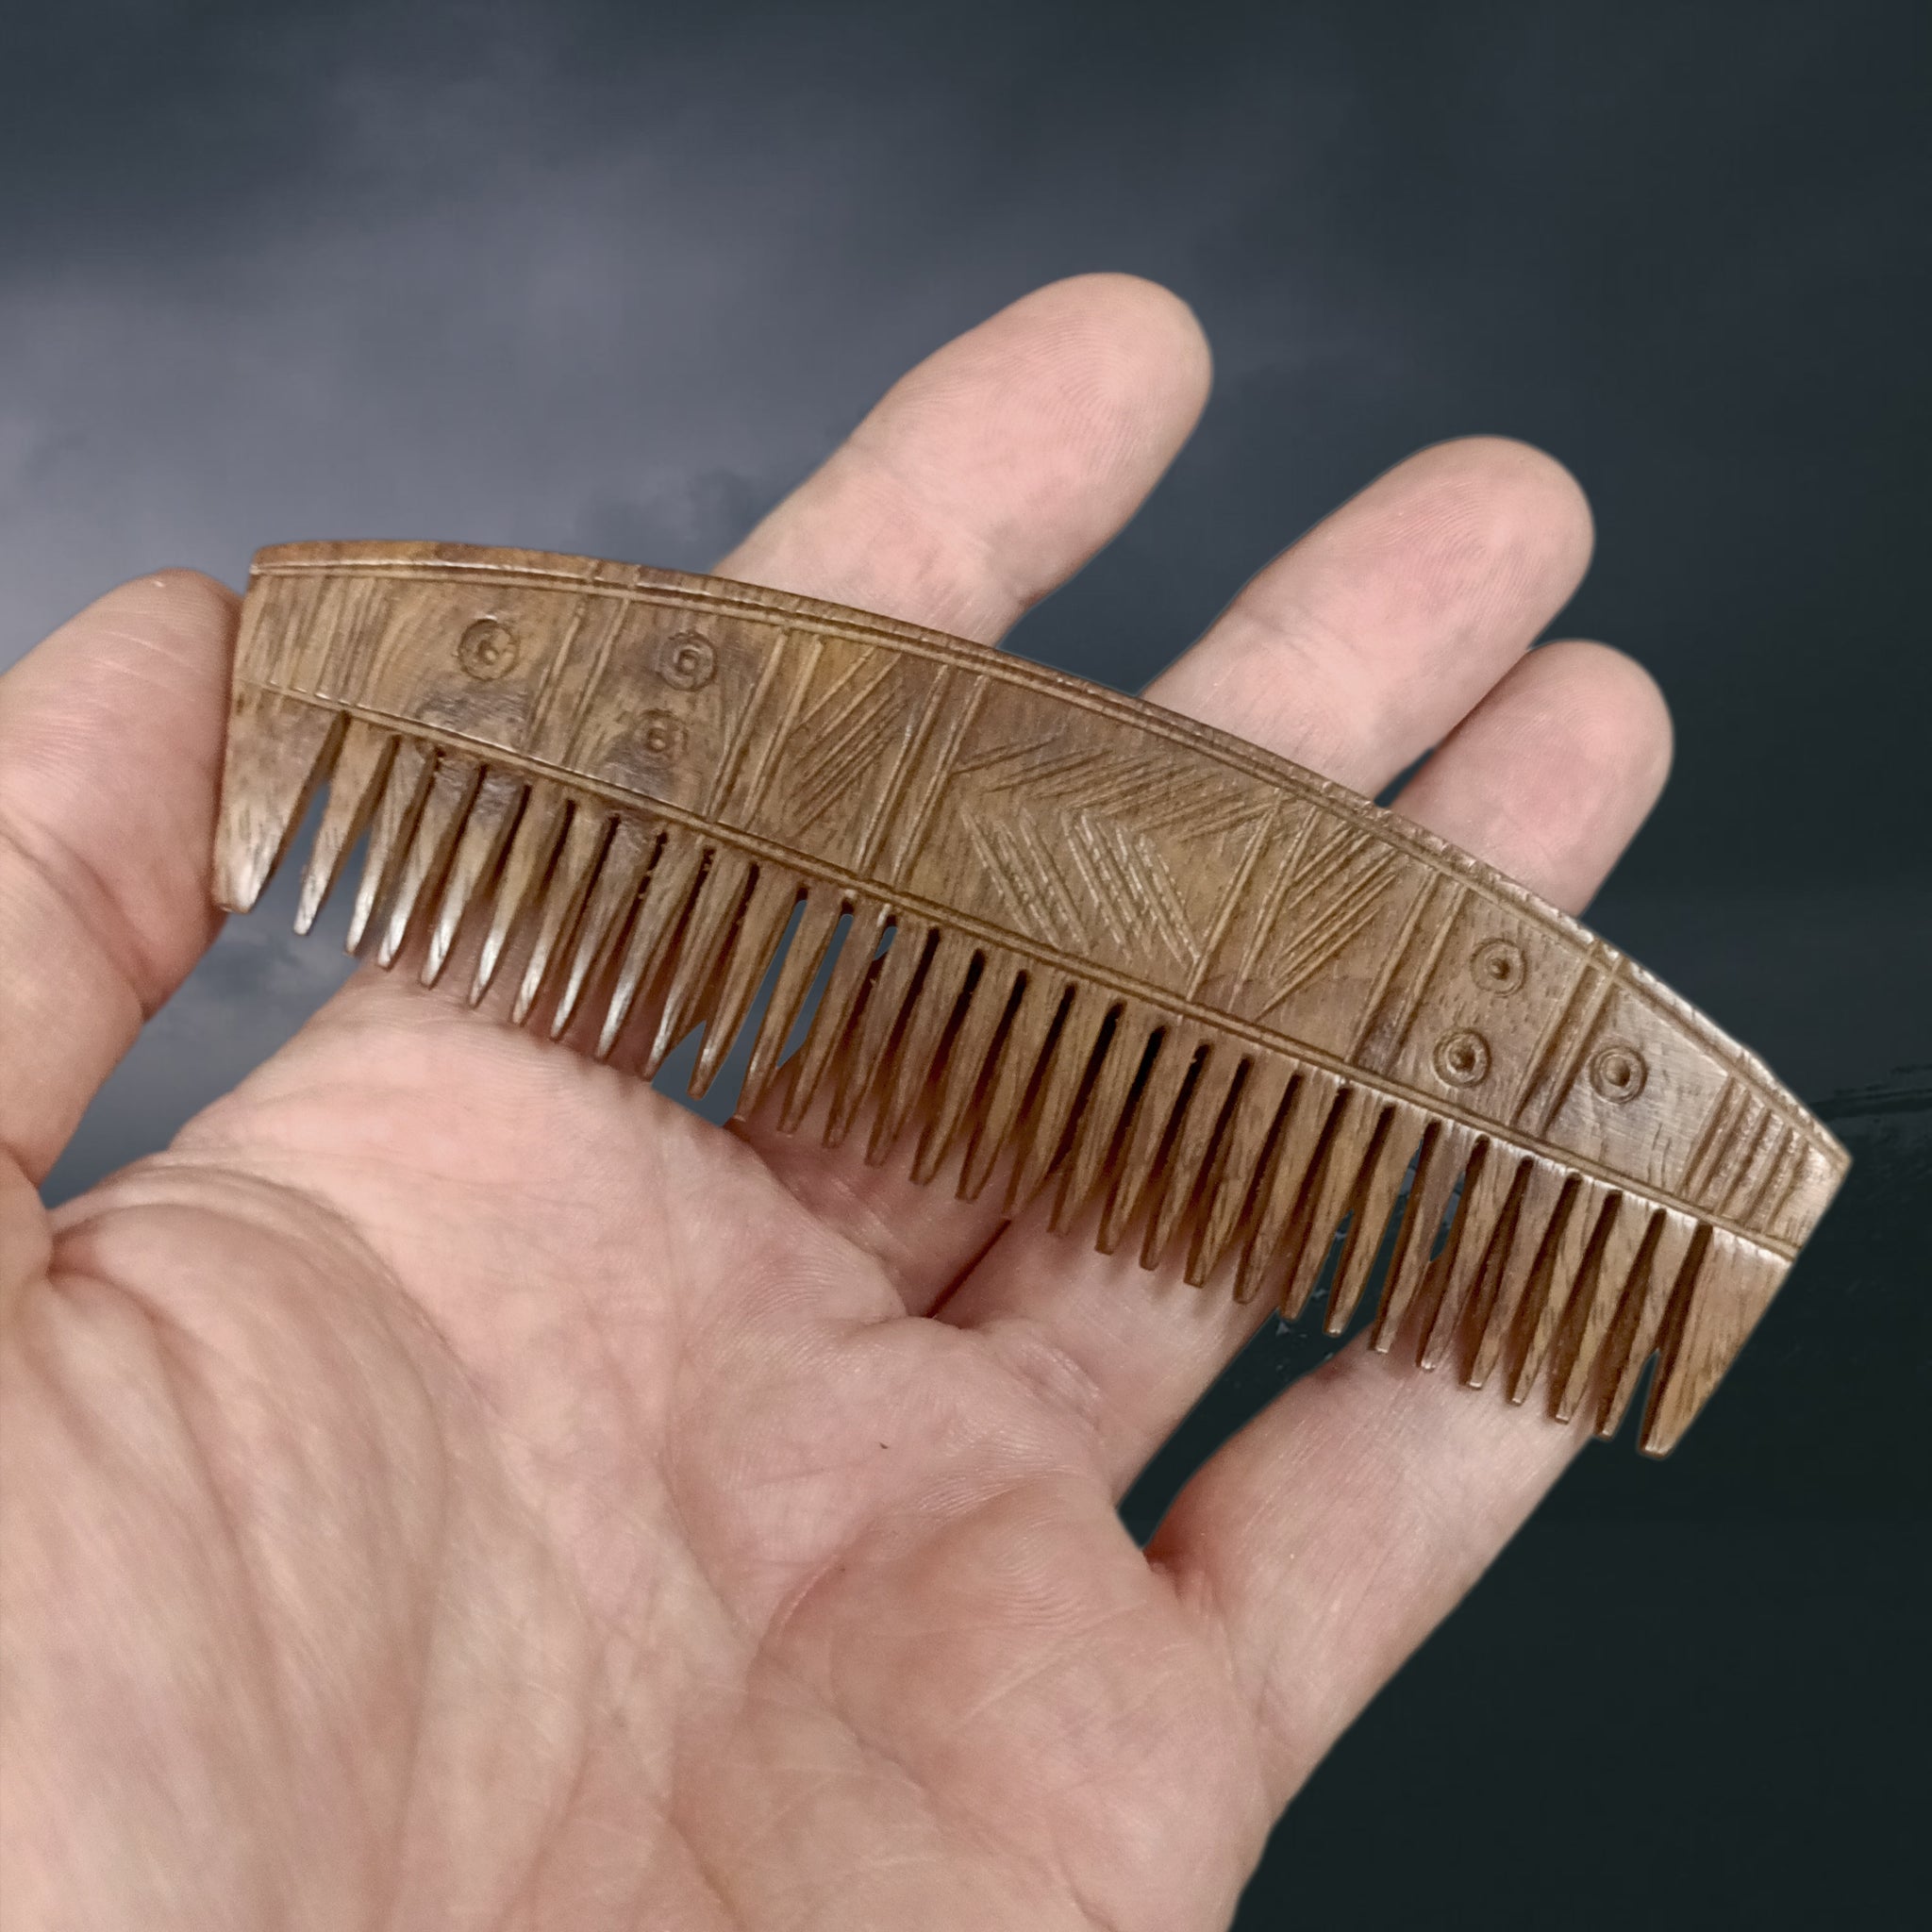 Handmade Decorated Wood Viking Comb in Hand